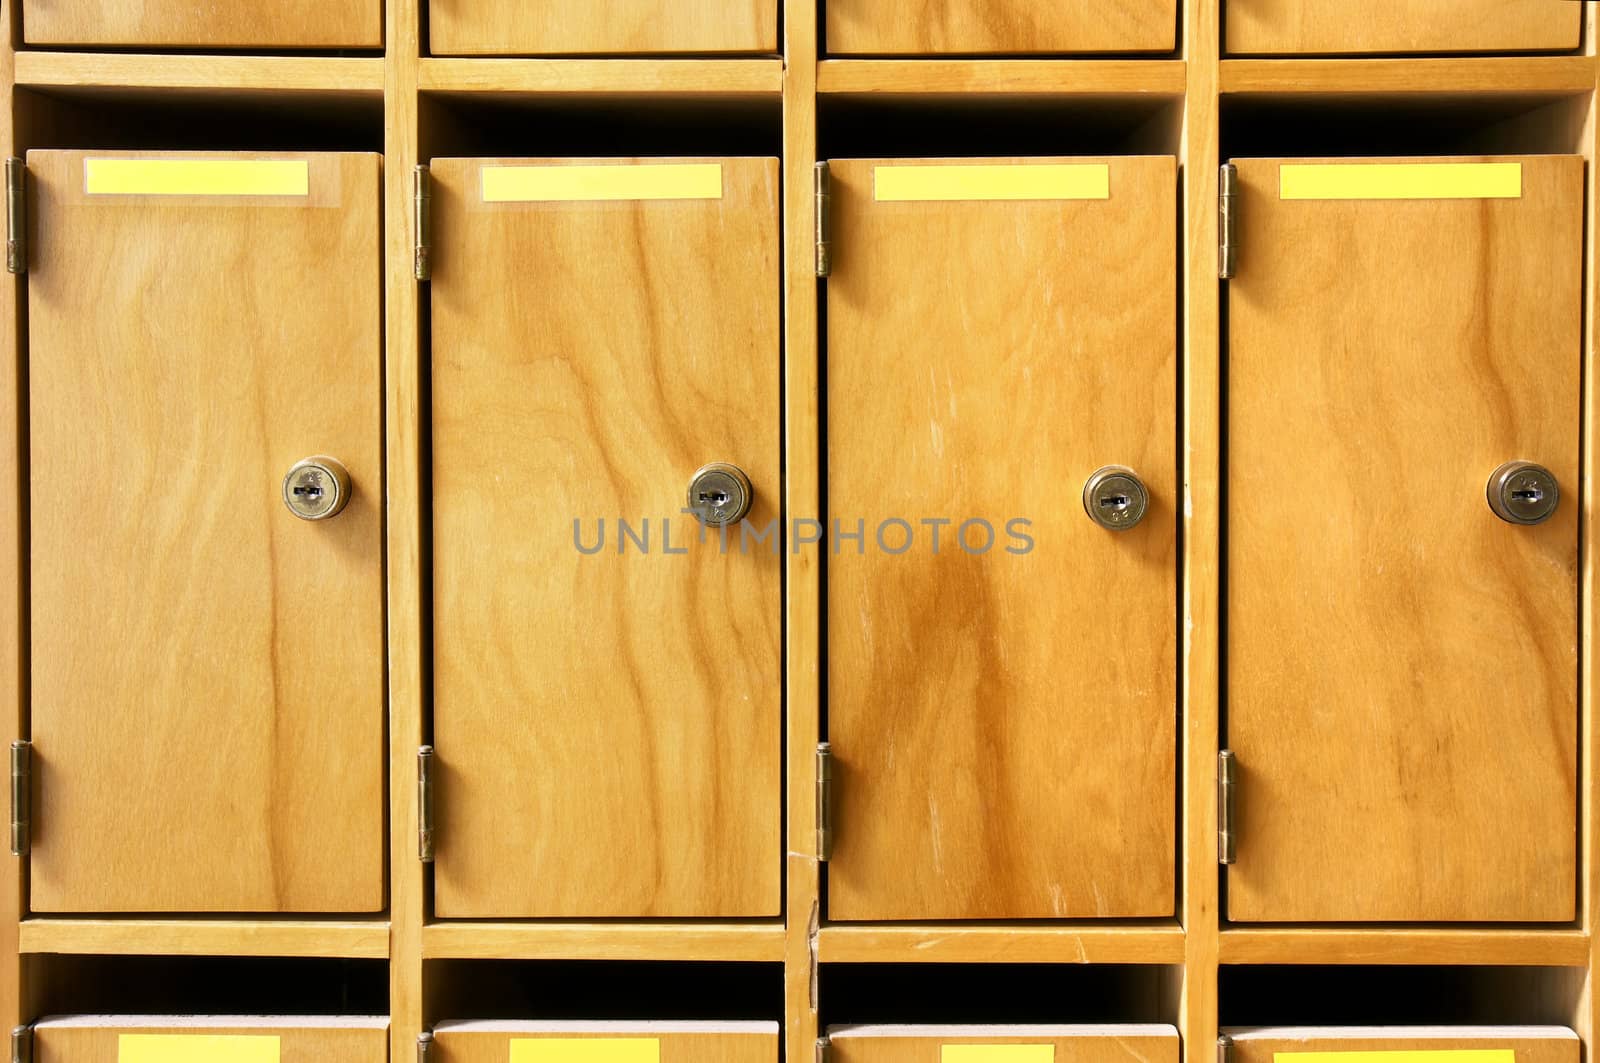 Office lockboxes by Mirage3